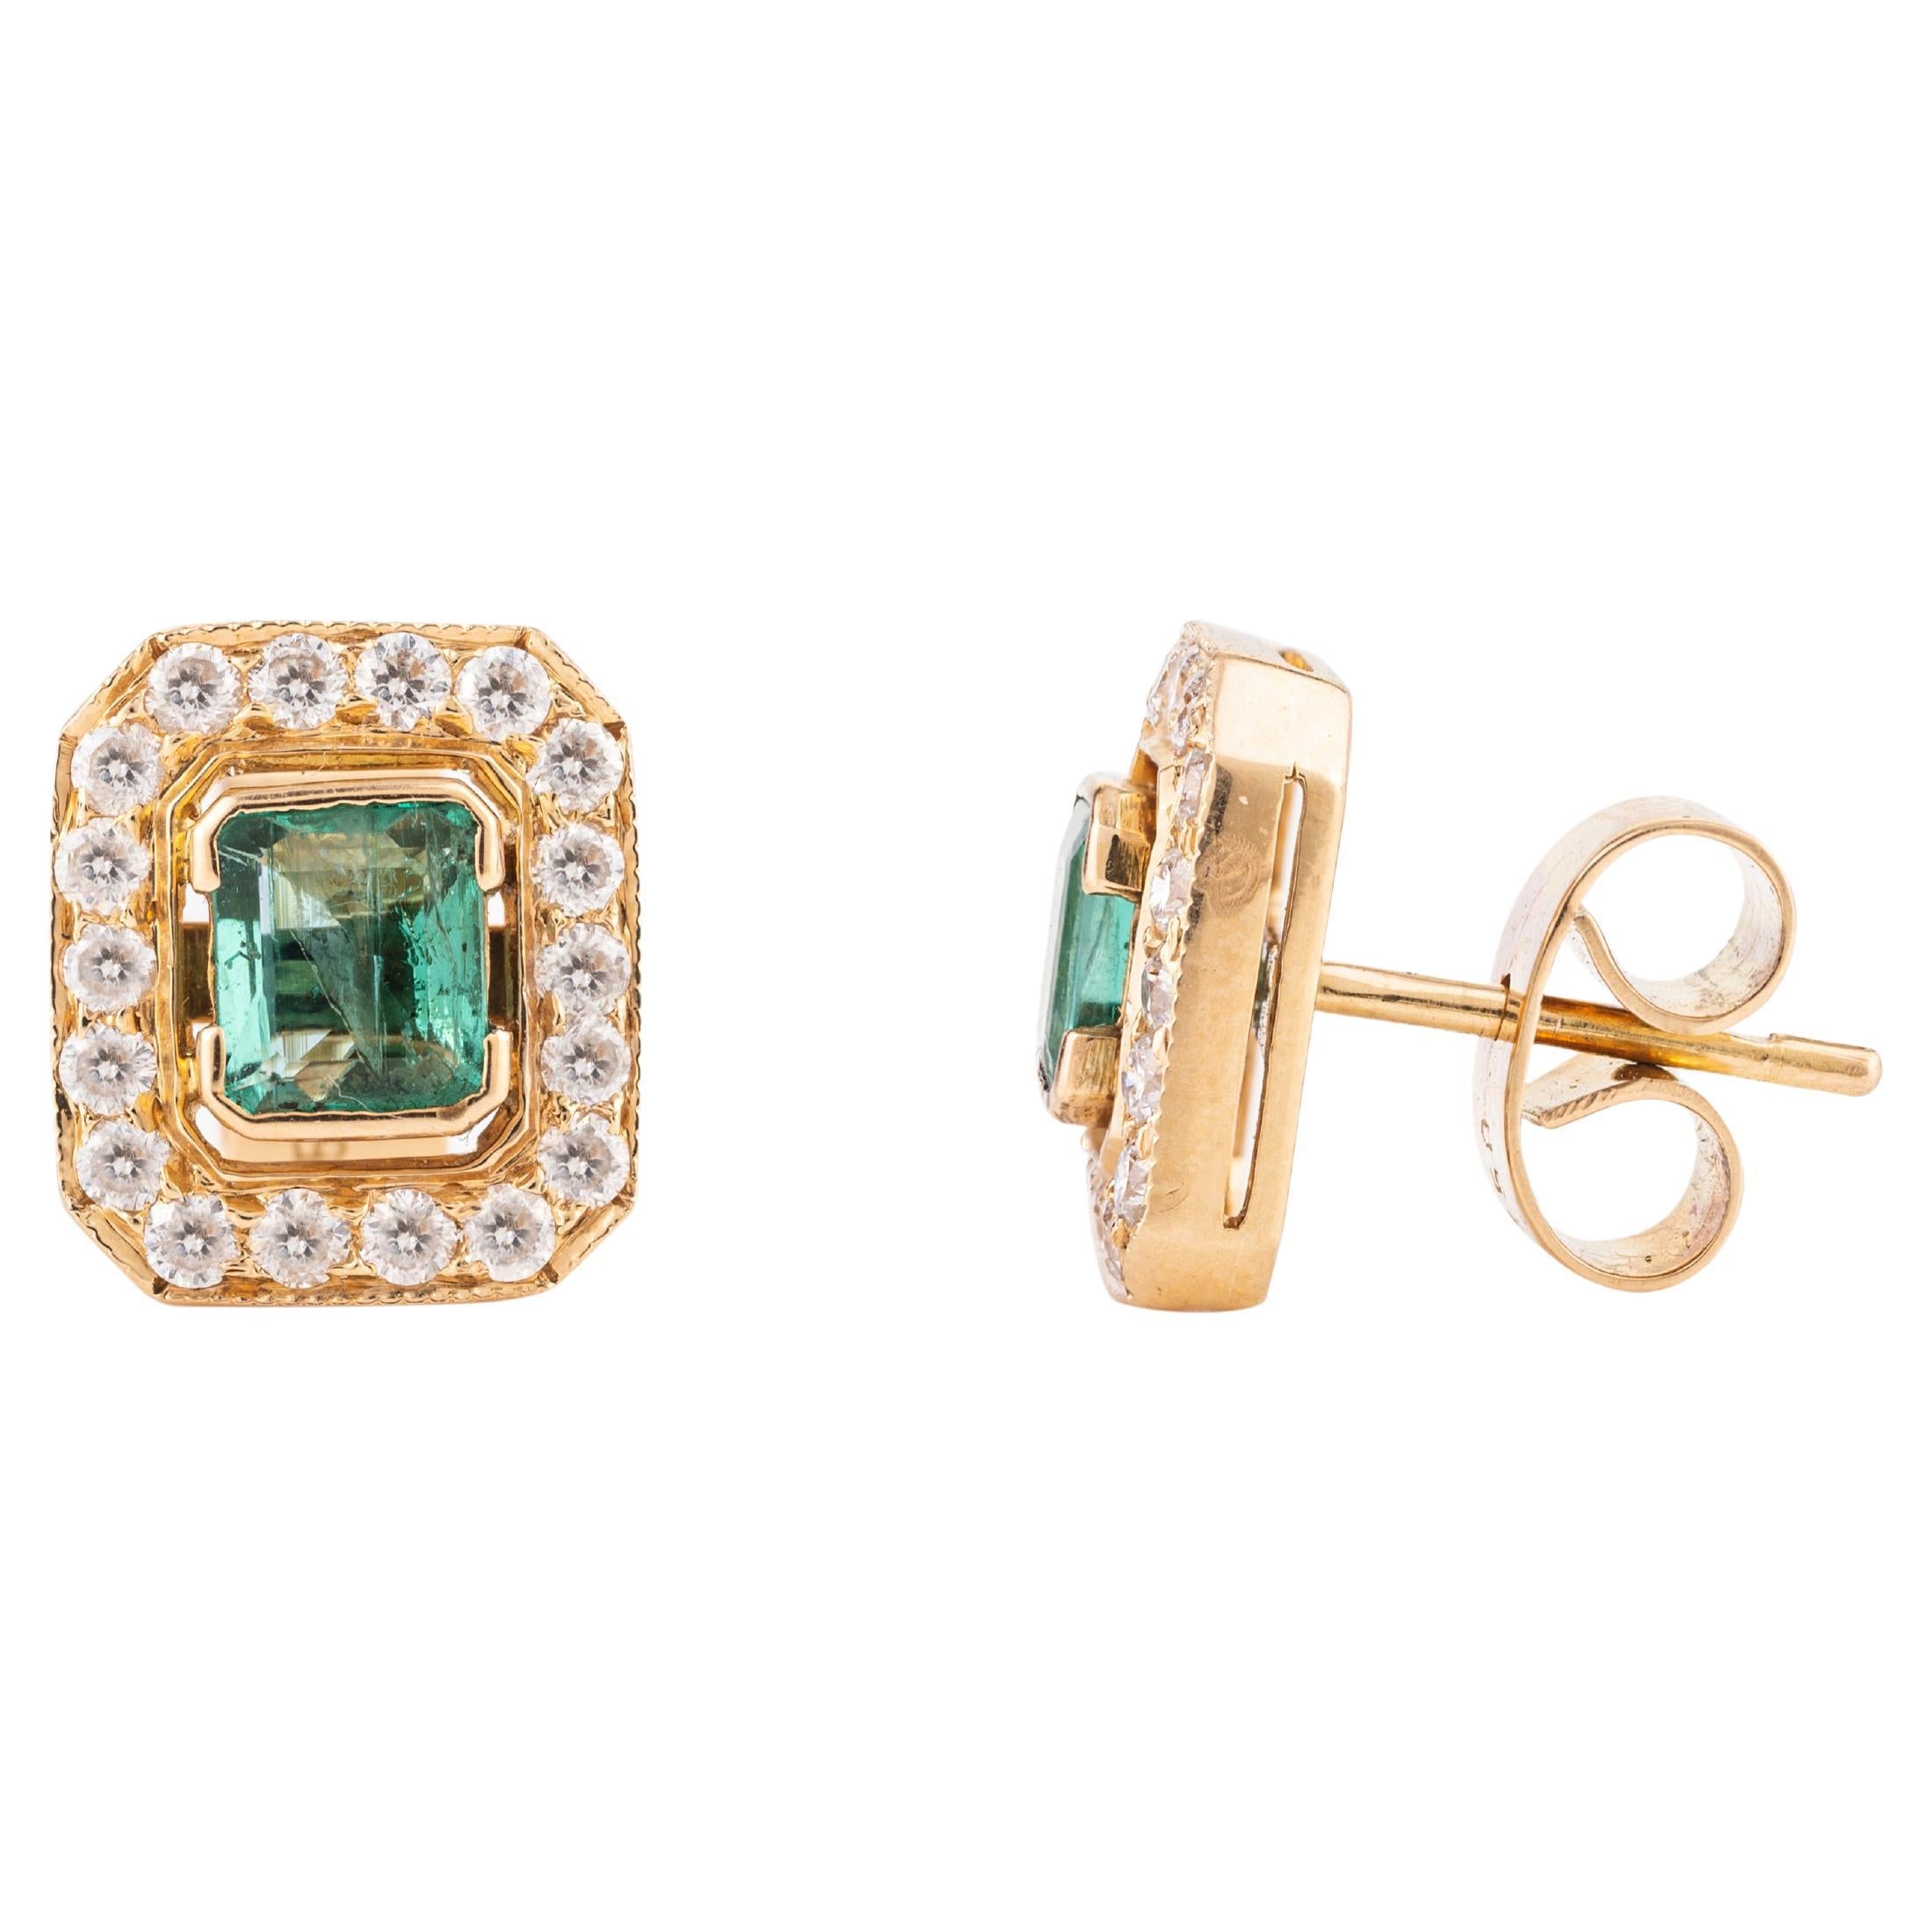 Octagon Cut Emerald Halo Diamond Big Stud Earrings in 18k Yellow Gold for Her For Sale